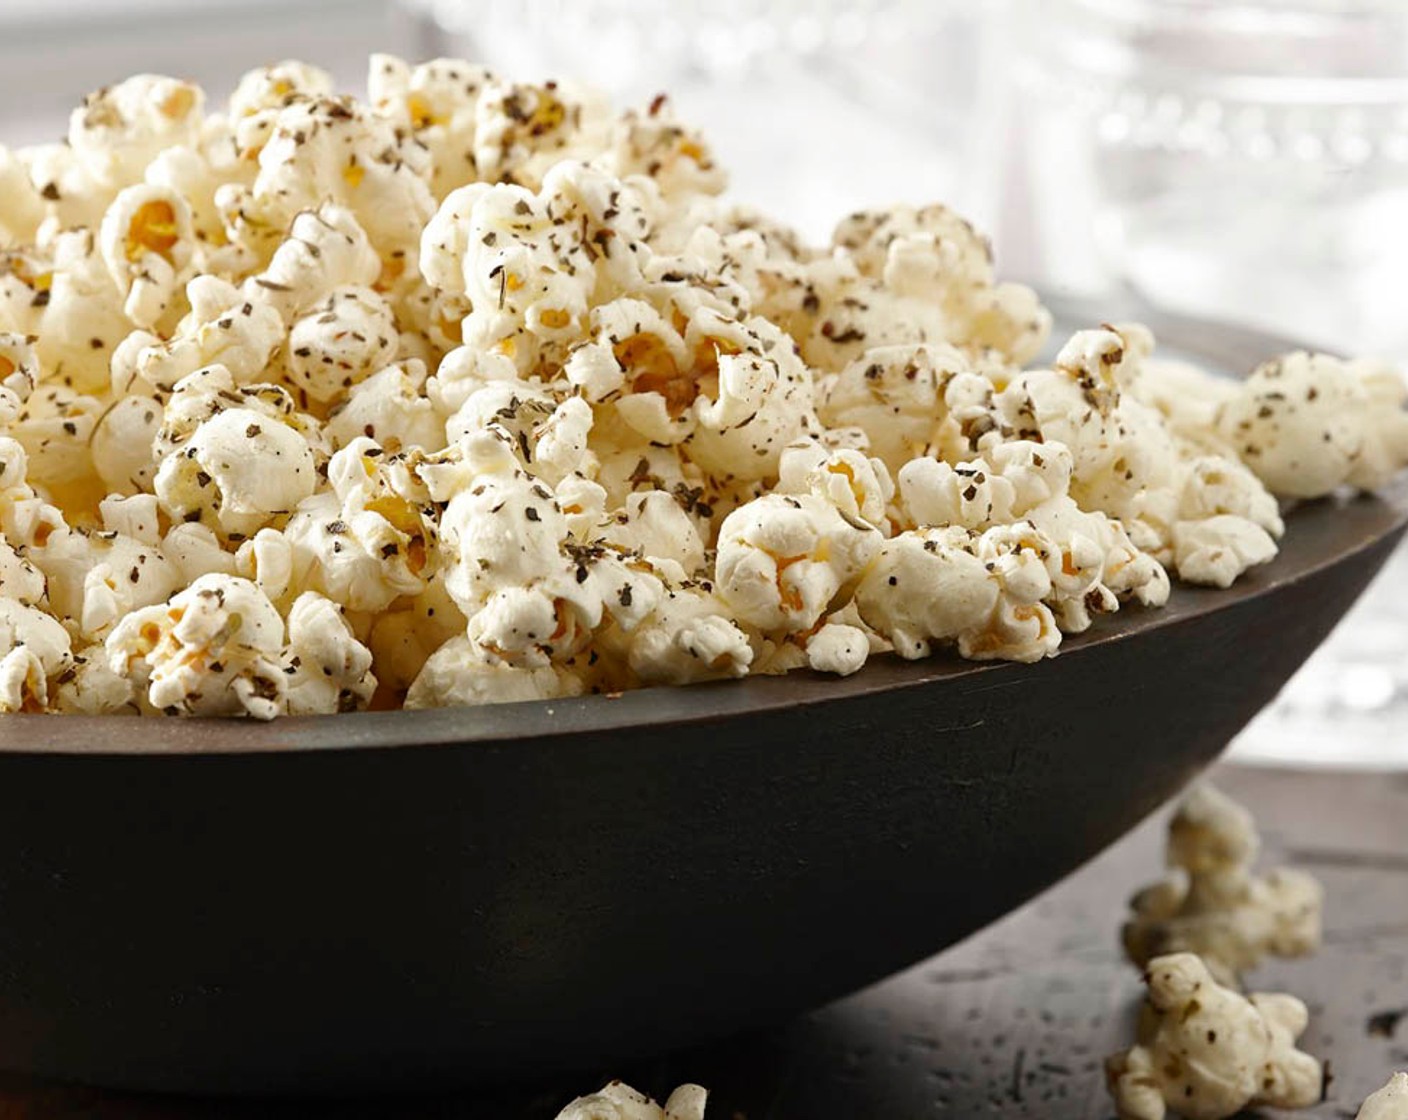 step 1 Mix the Olive Oil (2 Tbsp) and McCormick® Garlic Powder (1/2 tsp), Dried Basil (1 tsp), Dried Oregano (1 tsp), Ground Black Pepper (1/4 tsp), and Sea Salt (1/4 tsp) in a large bowl. Add the Popcorn (12 cups) and toss to coat evenly.